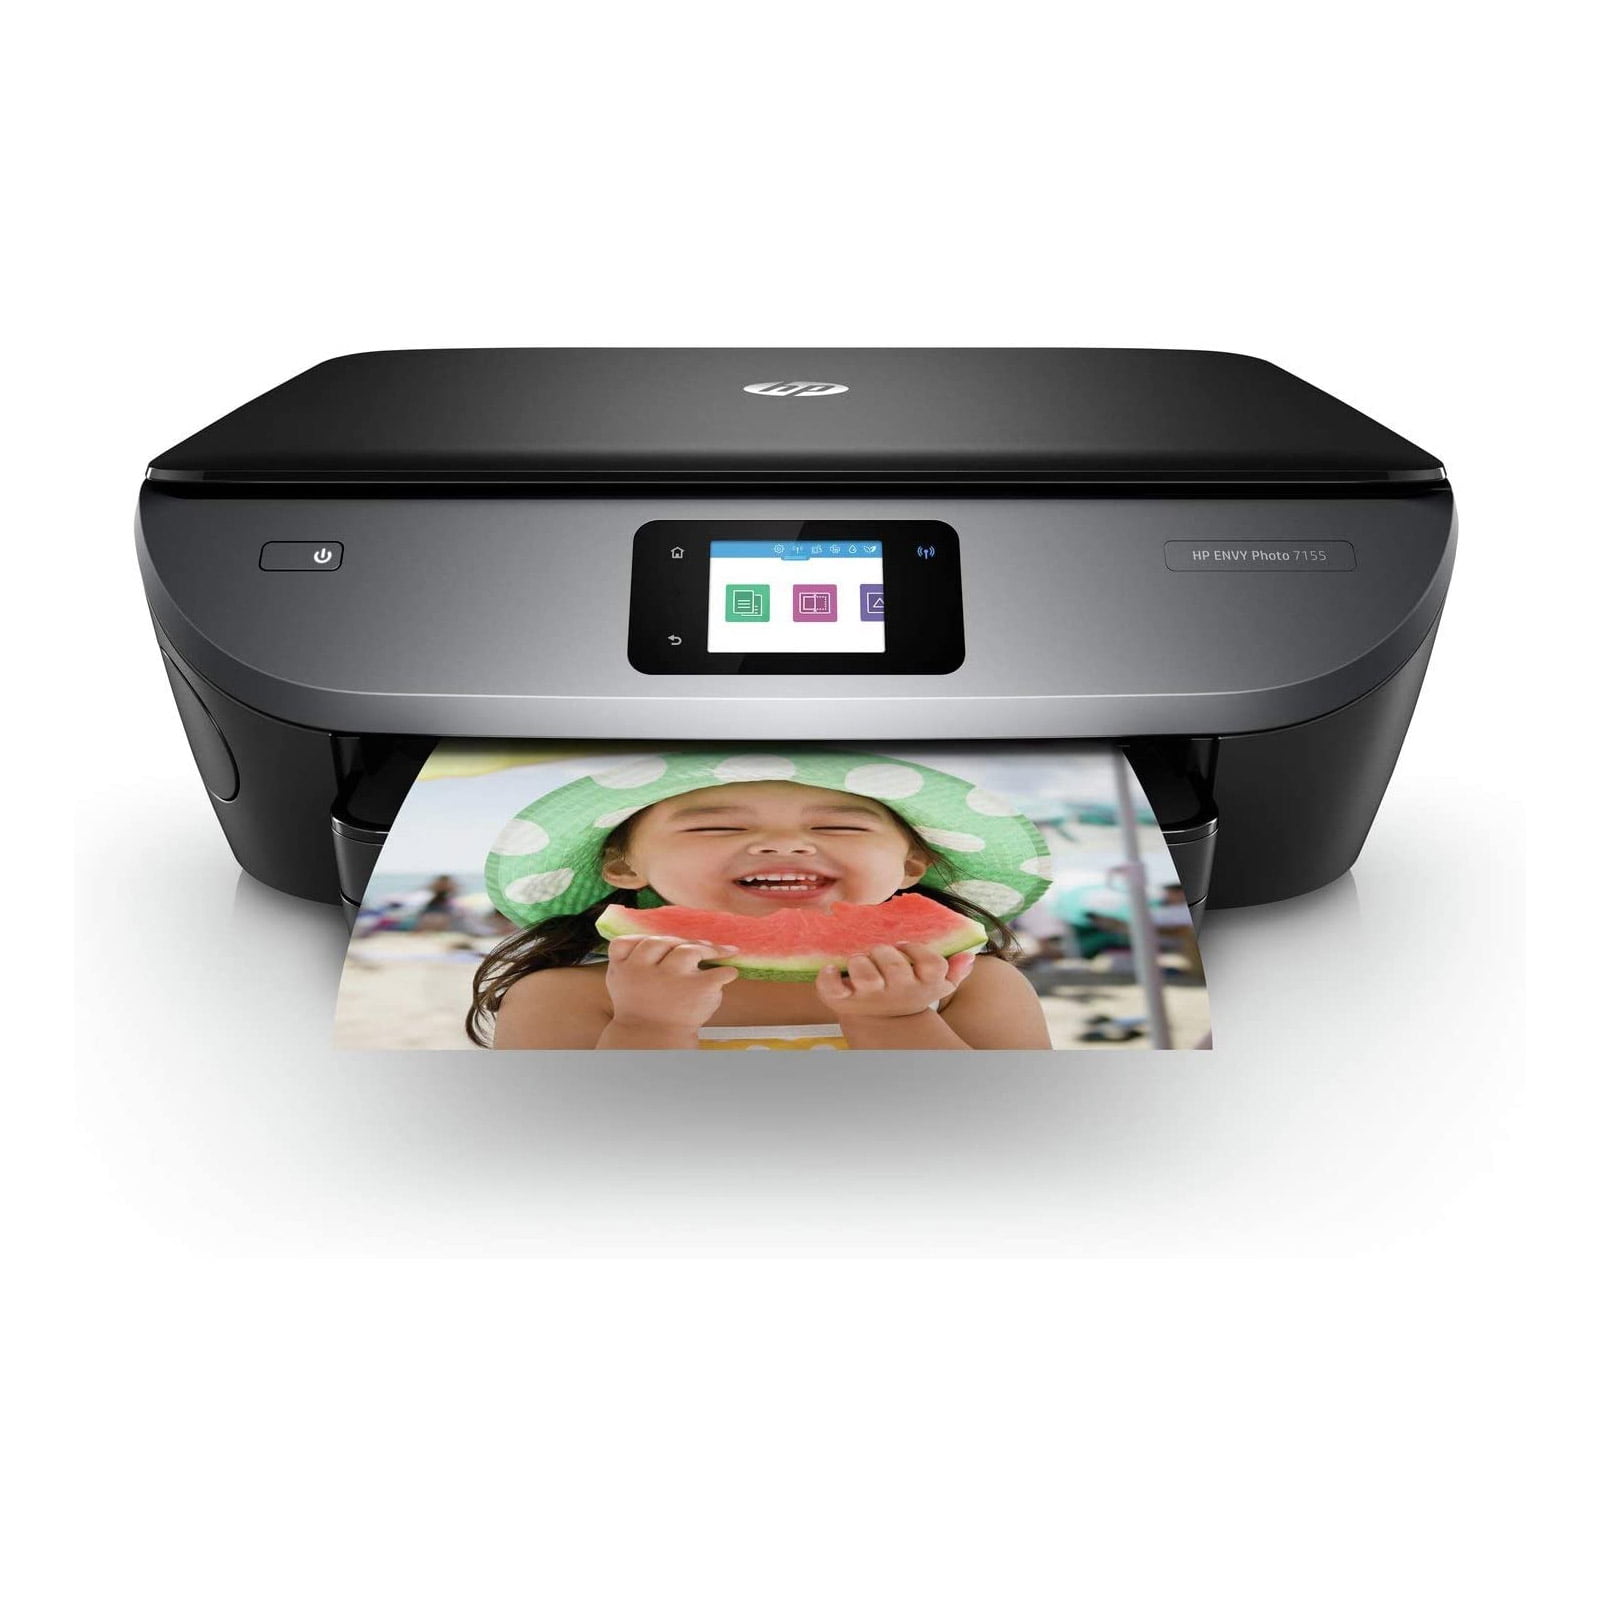 HP ENVY Photo 7155 All in One Photo Printer with Wireless Printing, K7G93A, Open - Walmart.com